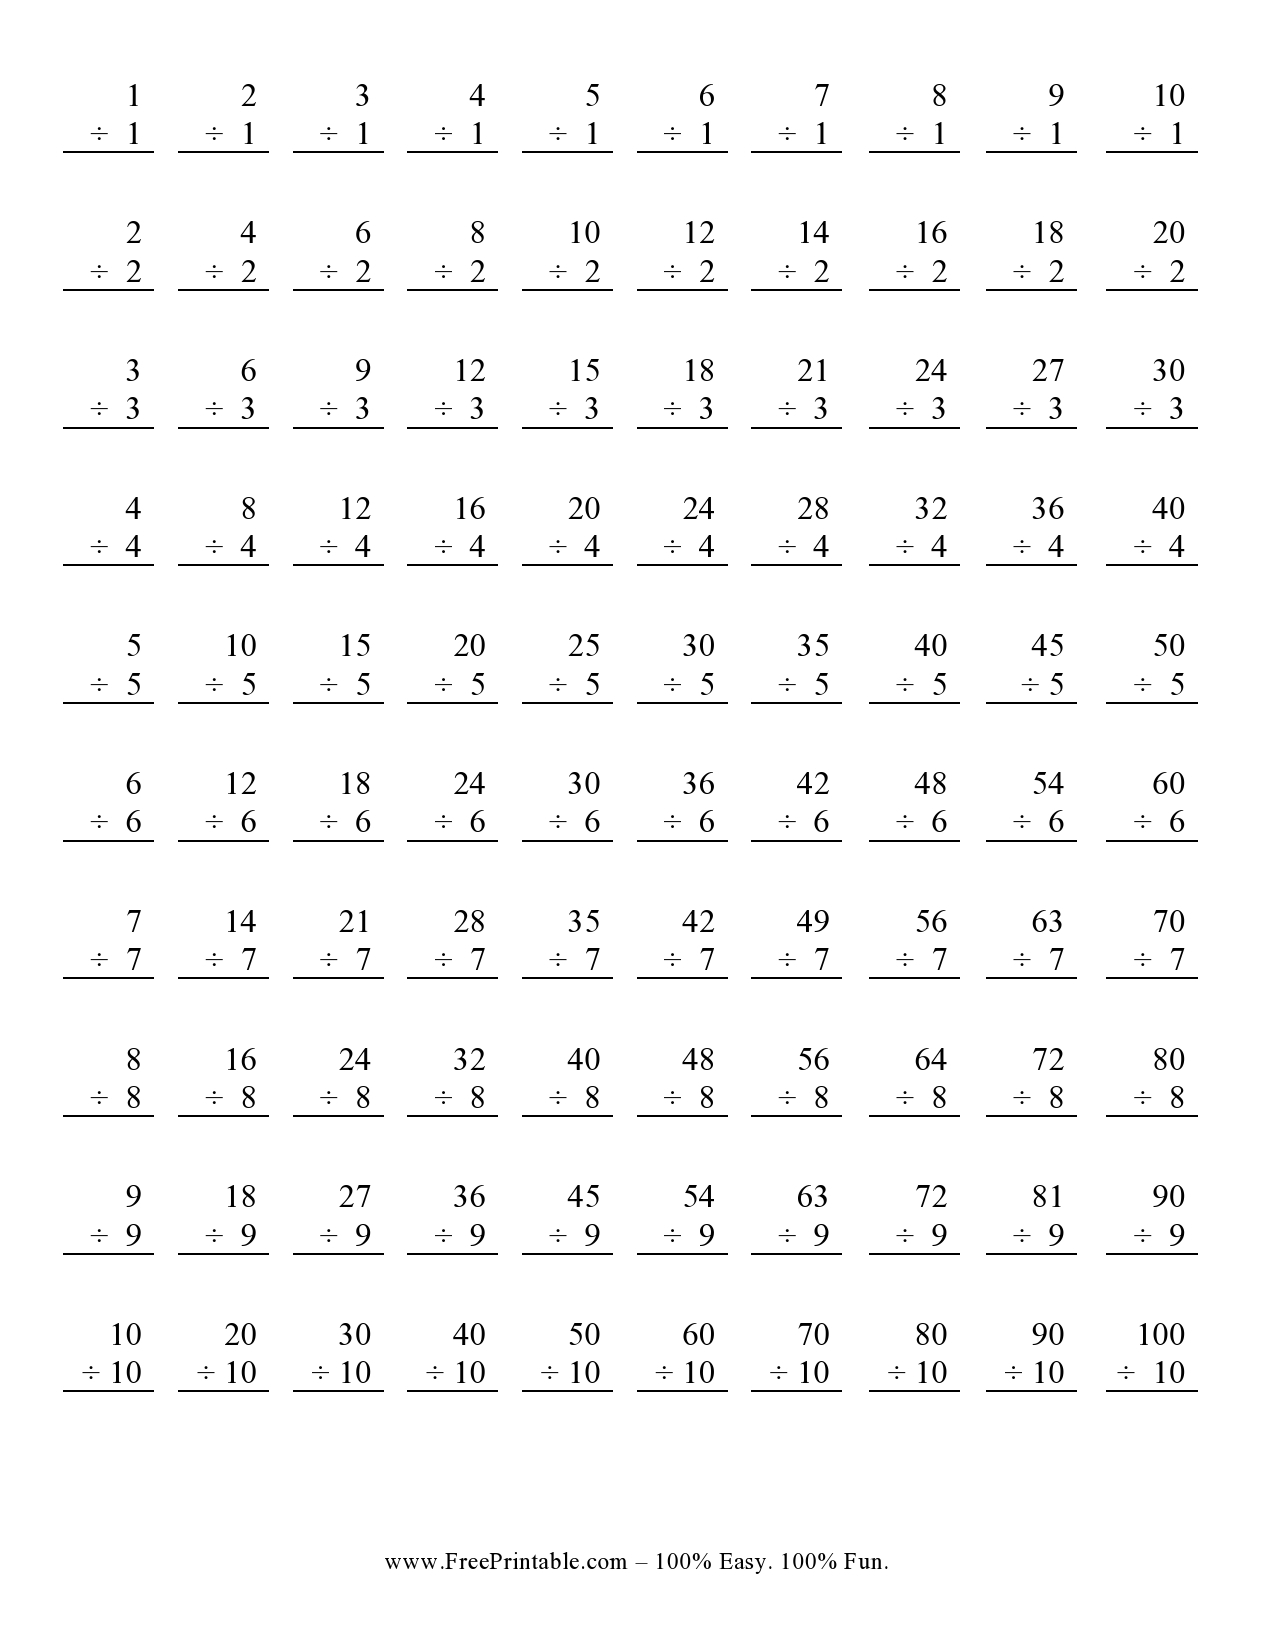 Customize Your Free Printable Division Worksheet 1 10